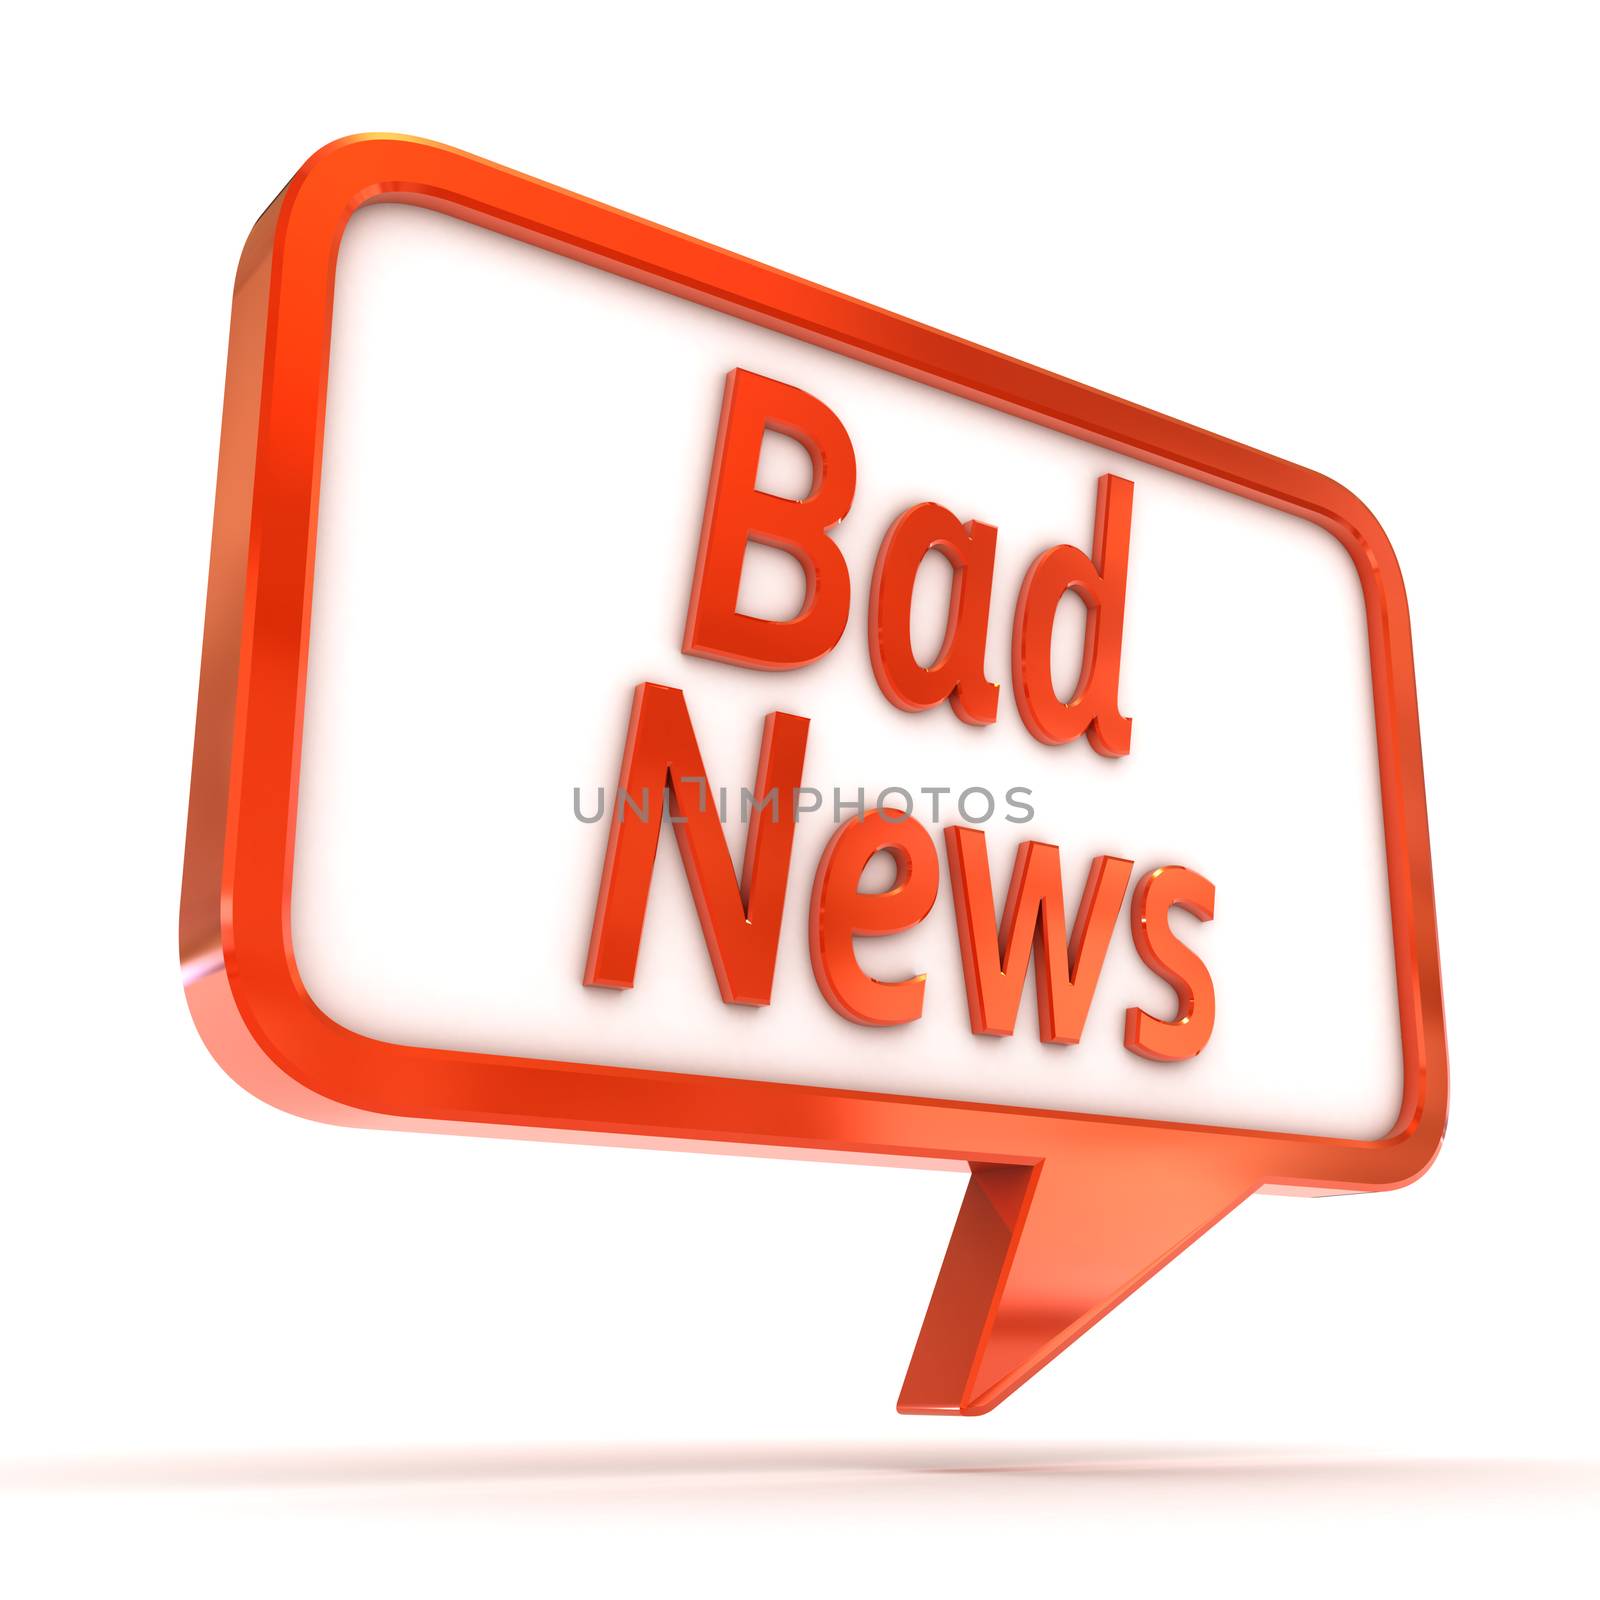 A Colourful 3d Rendered Concept Illustration showing "Bad News" writen in a Speech Bubble